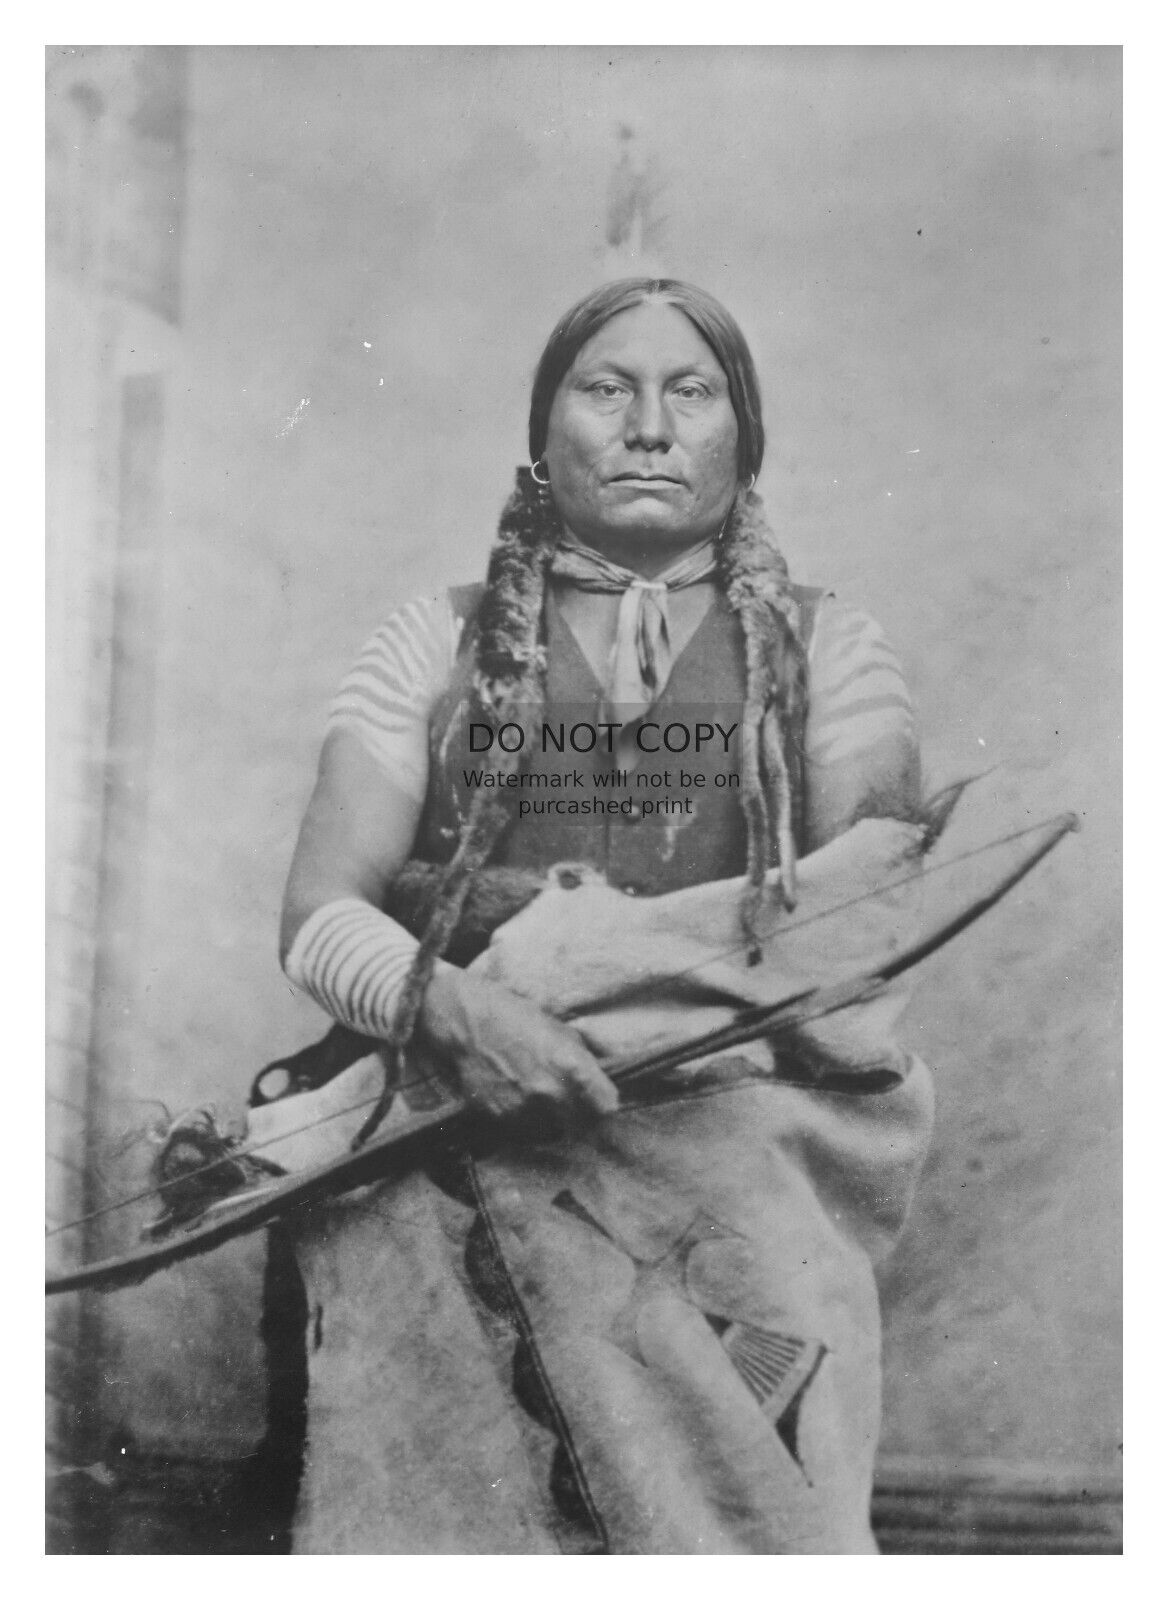 CHIEF GALL NATIVE AMERICAN CHEIF SURVIVOR OF CUSTERS LAST STAND 5X7 PHOTO